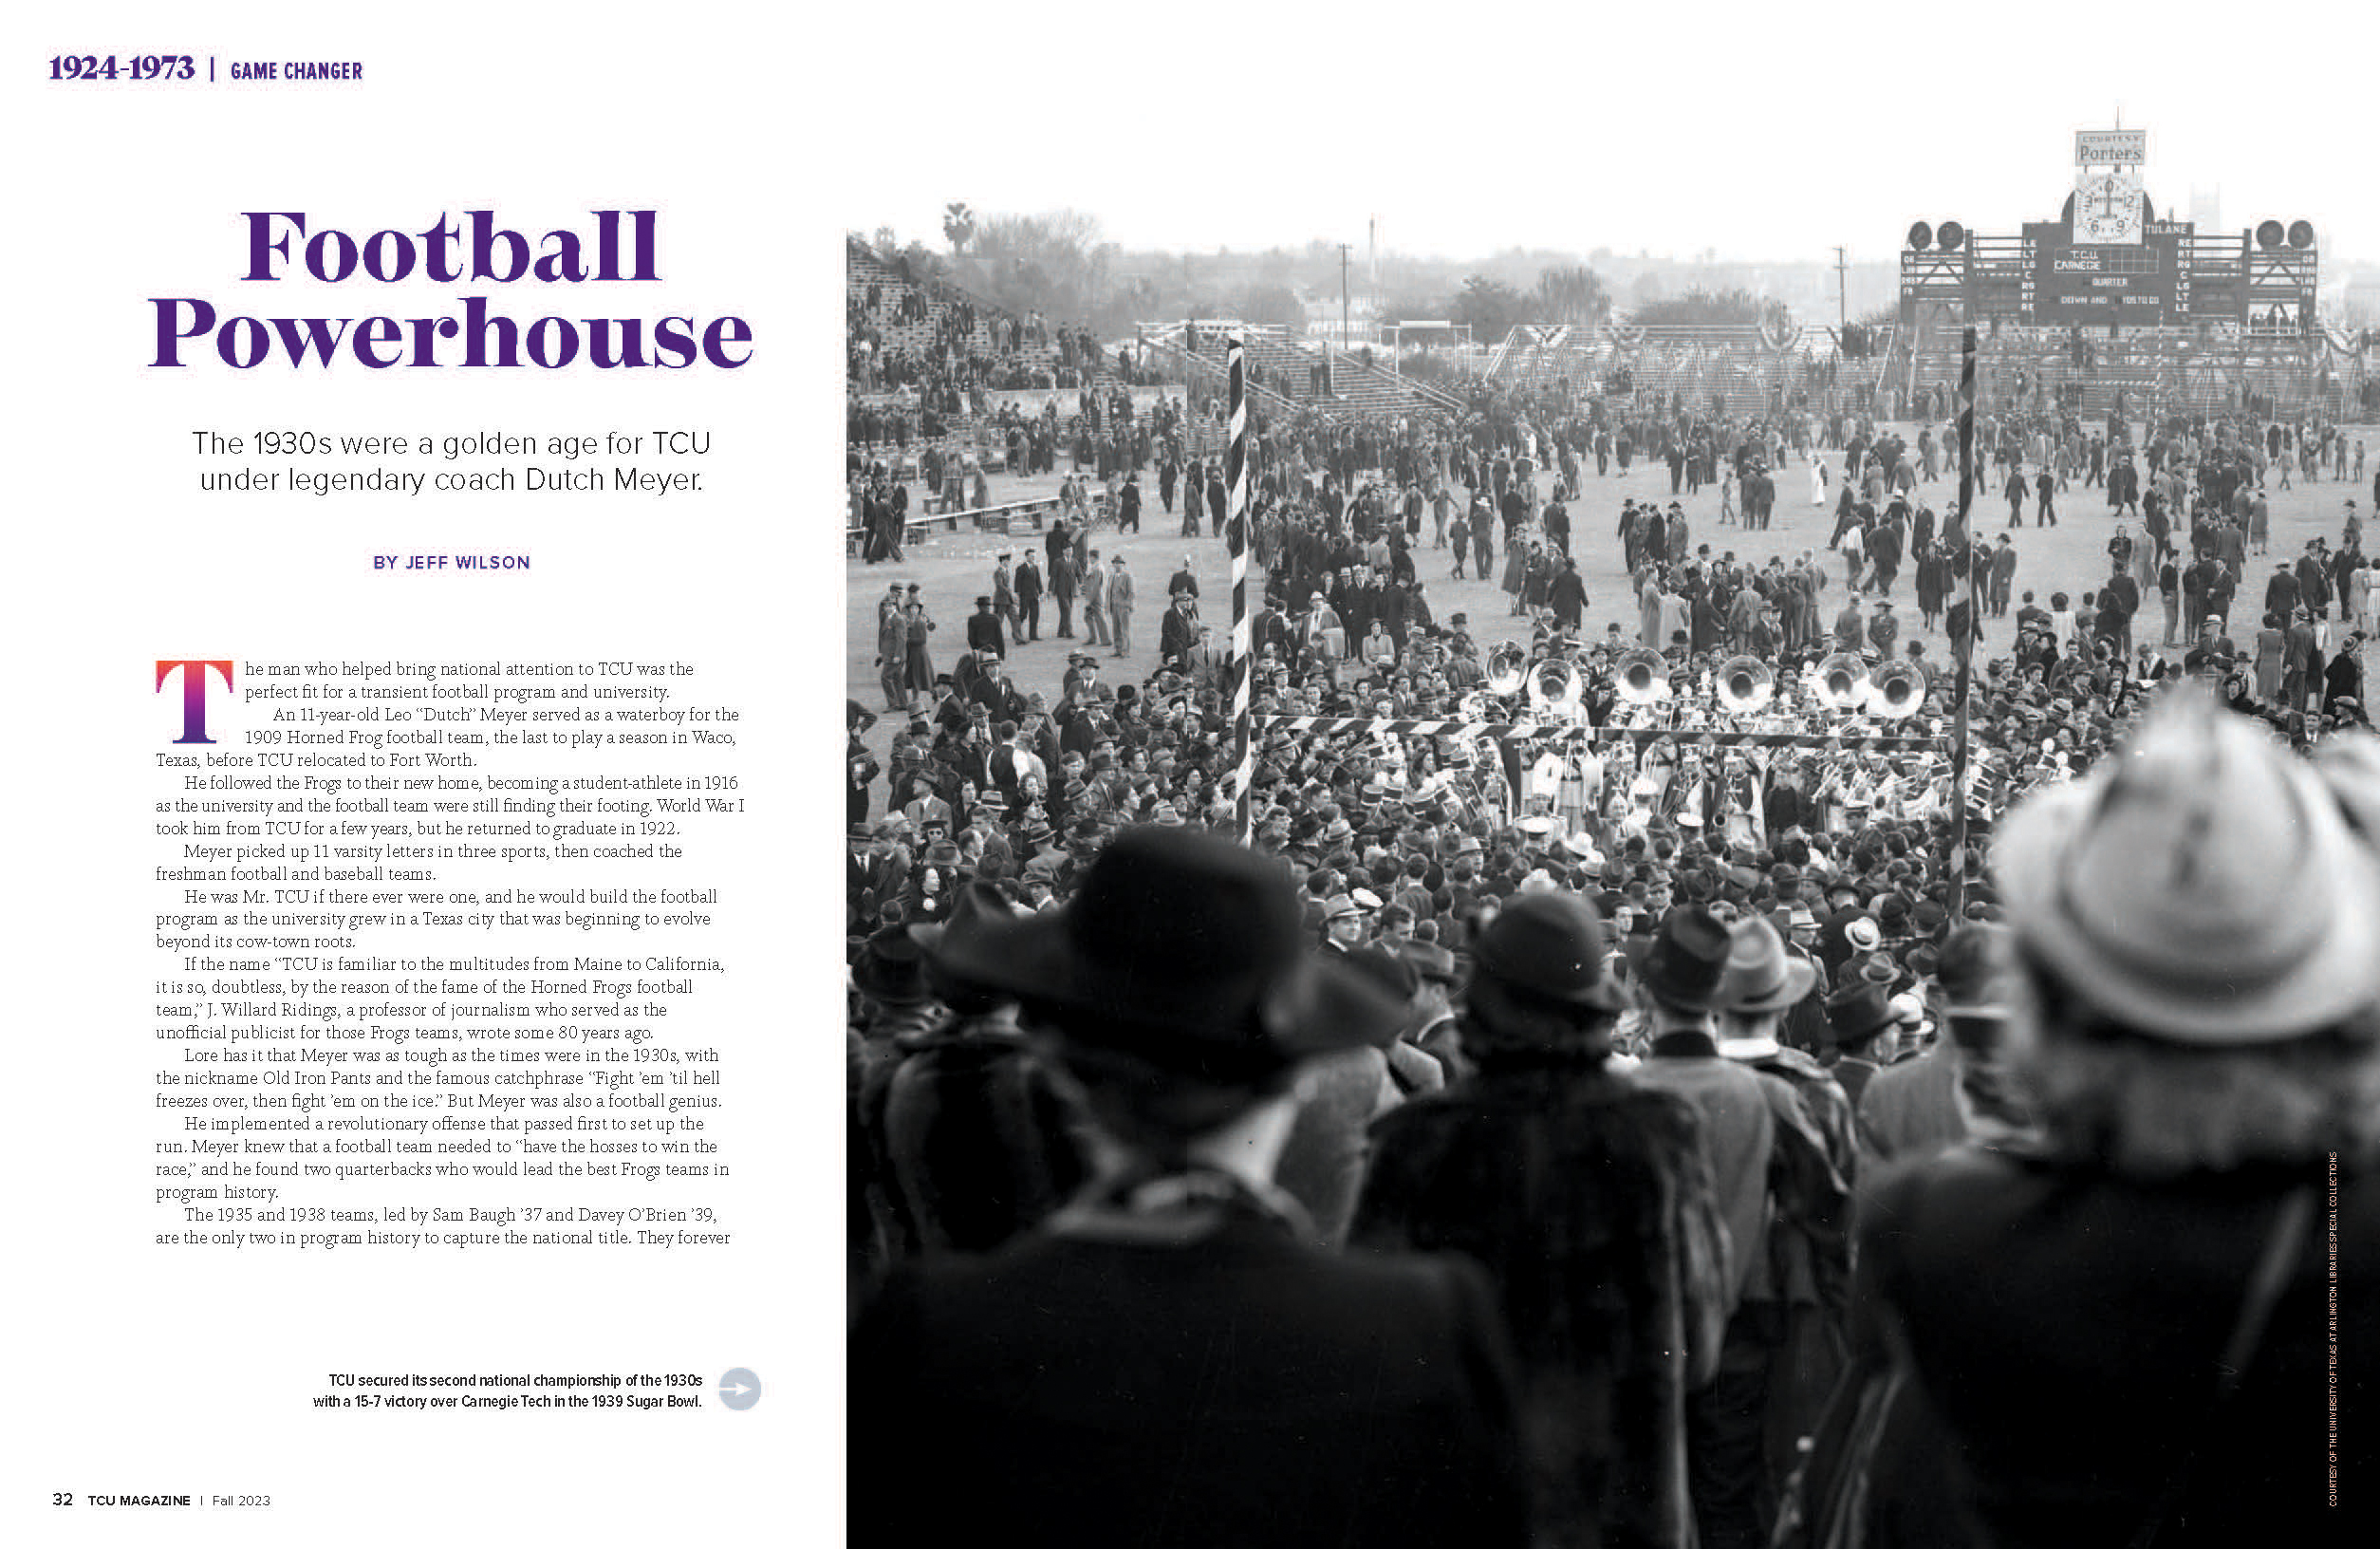 TCU Magazine Fall 2023 issue featuring an article titled "Football Powerhouse" on the history of TCU Football. There is text on the left side and a large black and white photo on the right.